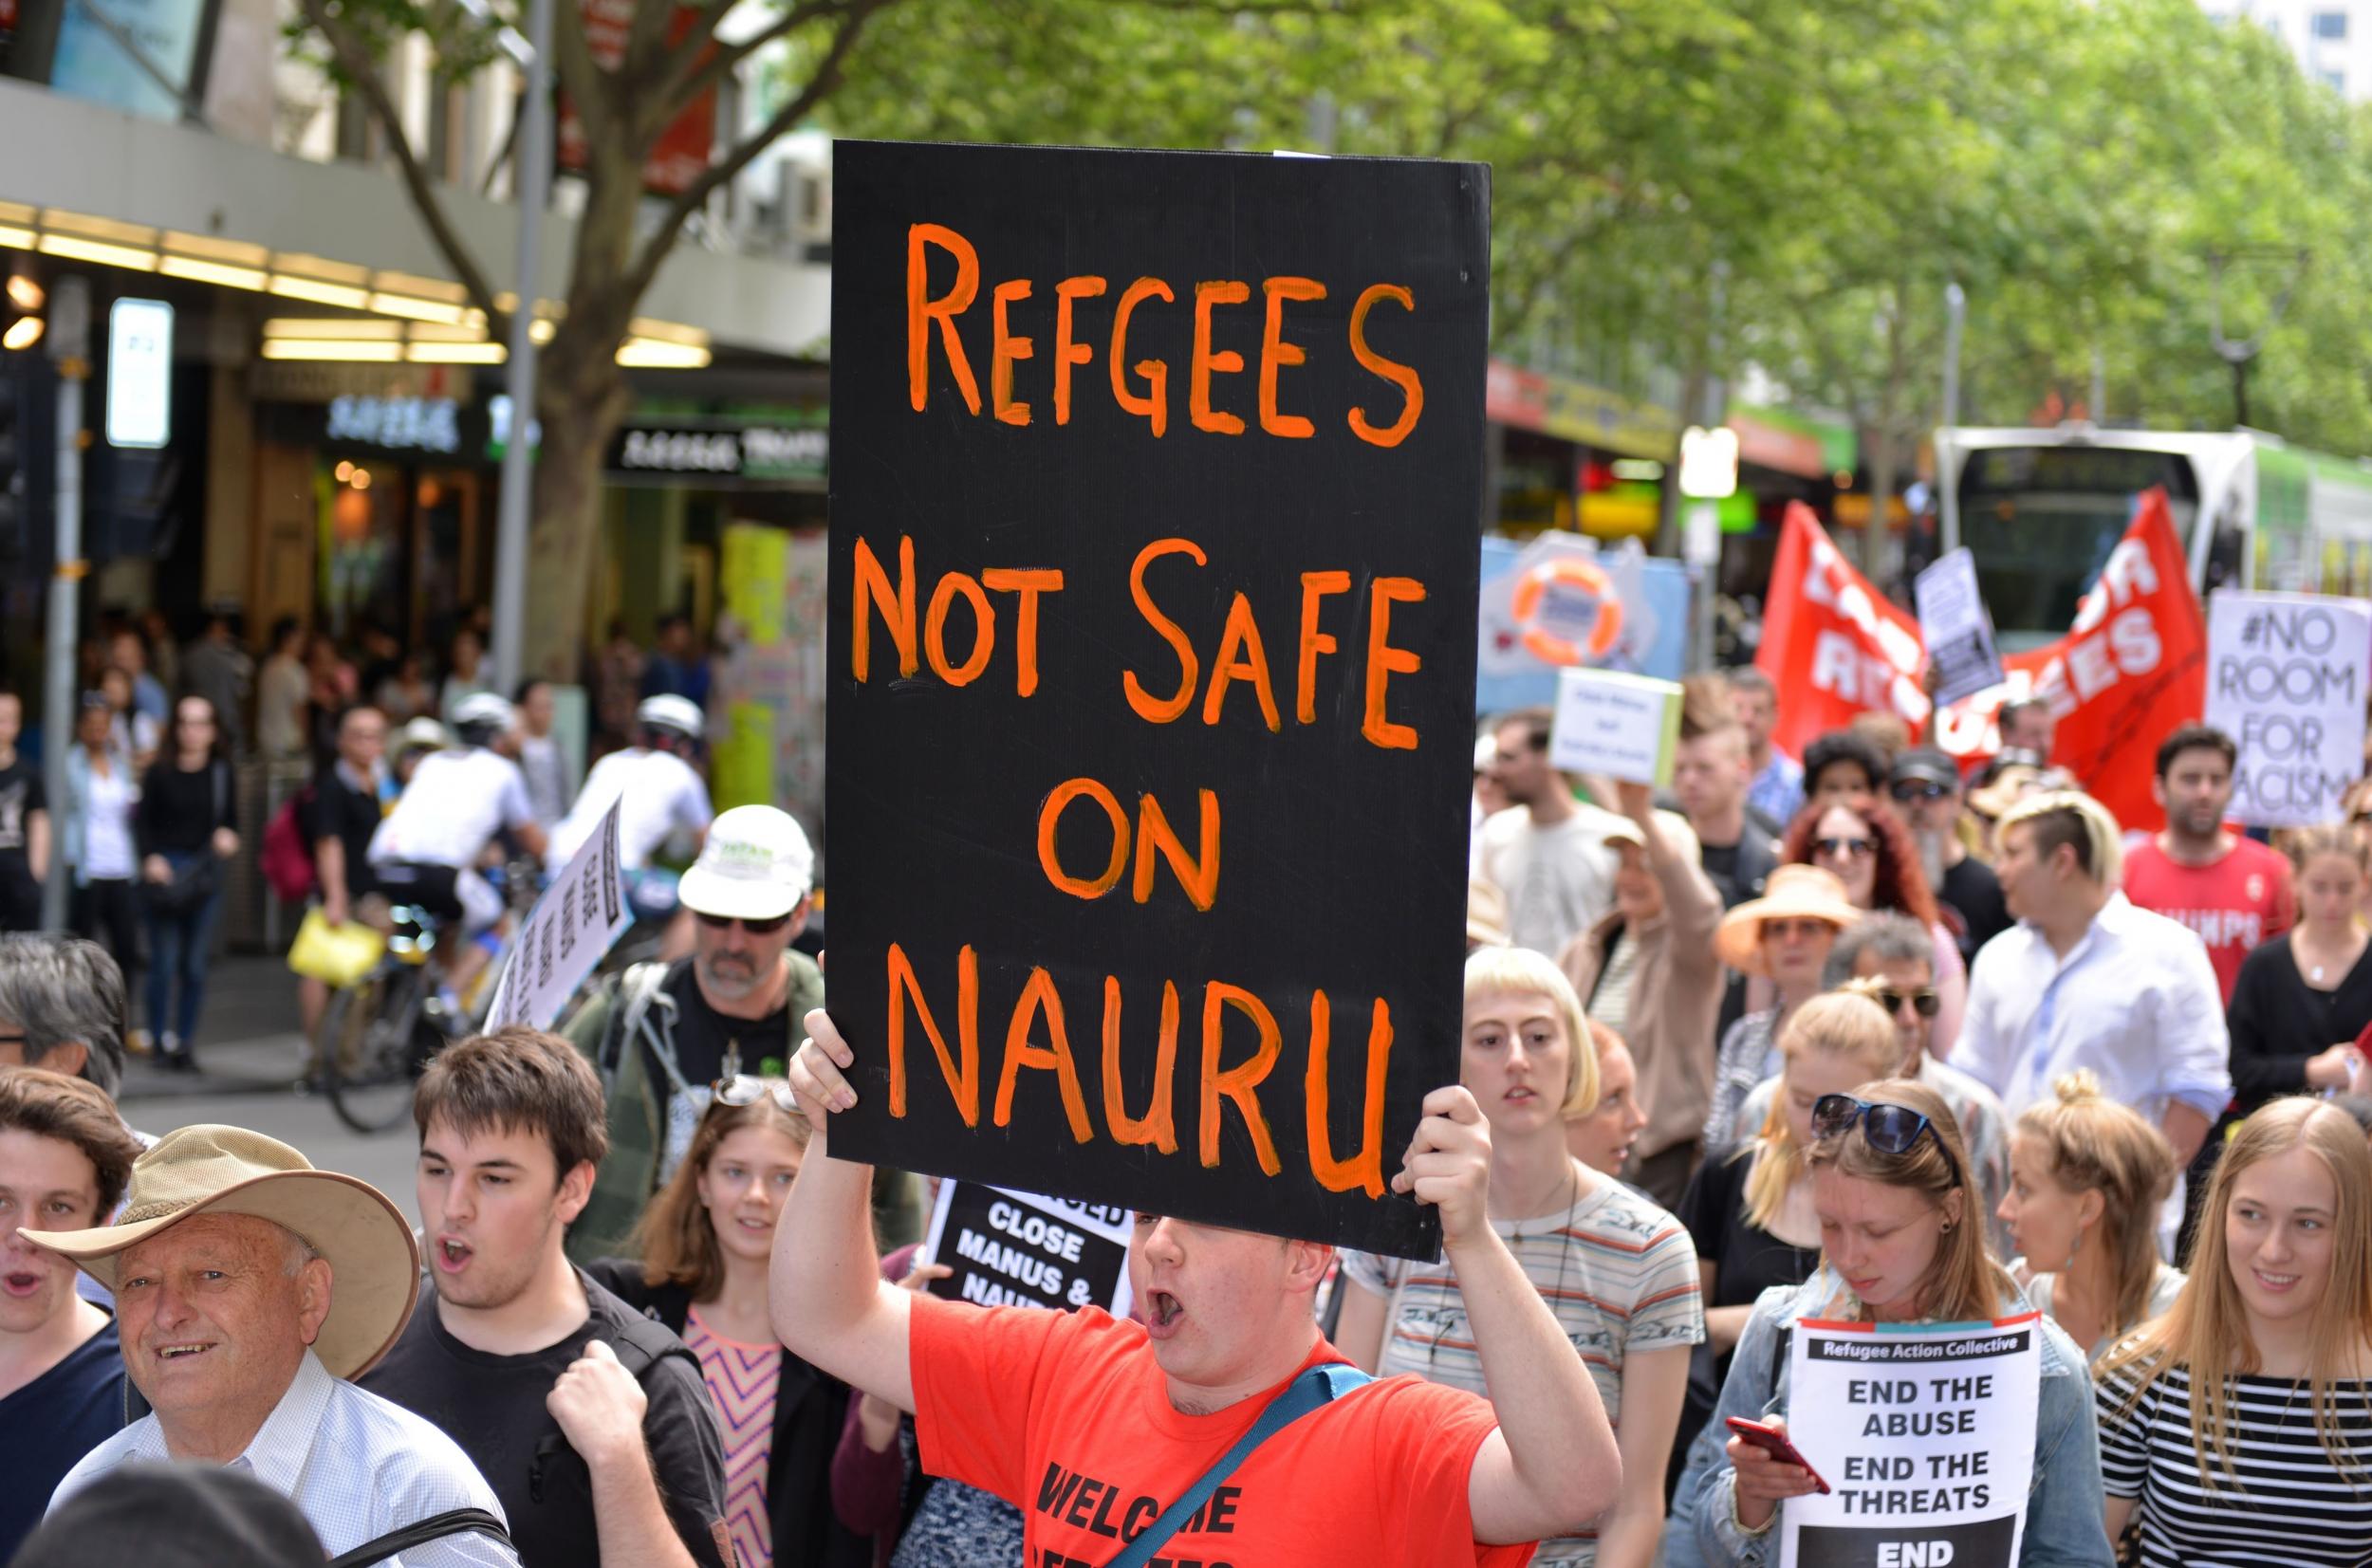 Protesters in Melbourne call for the closure of Australian immigration detention centres on the islands of Manus and Nauru